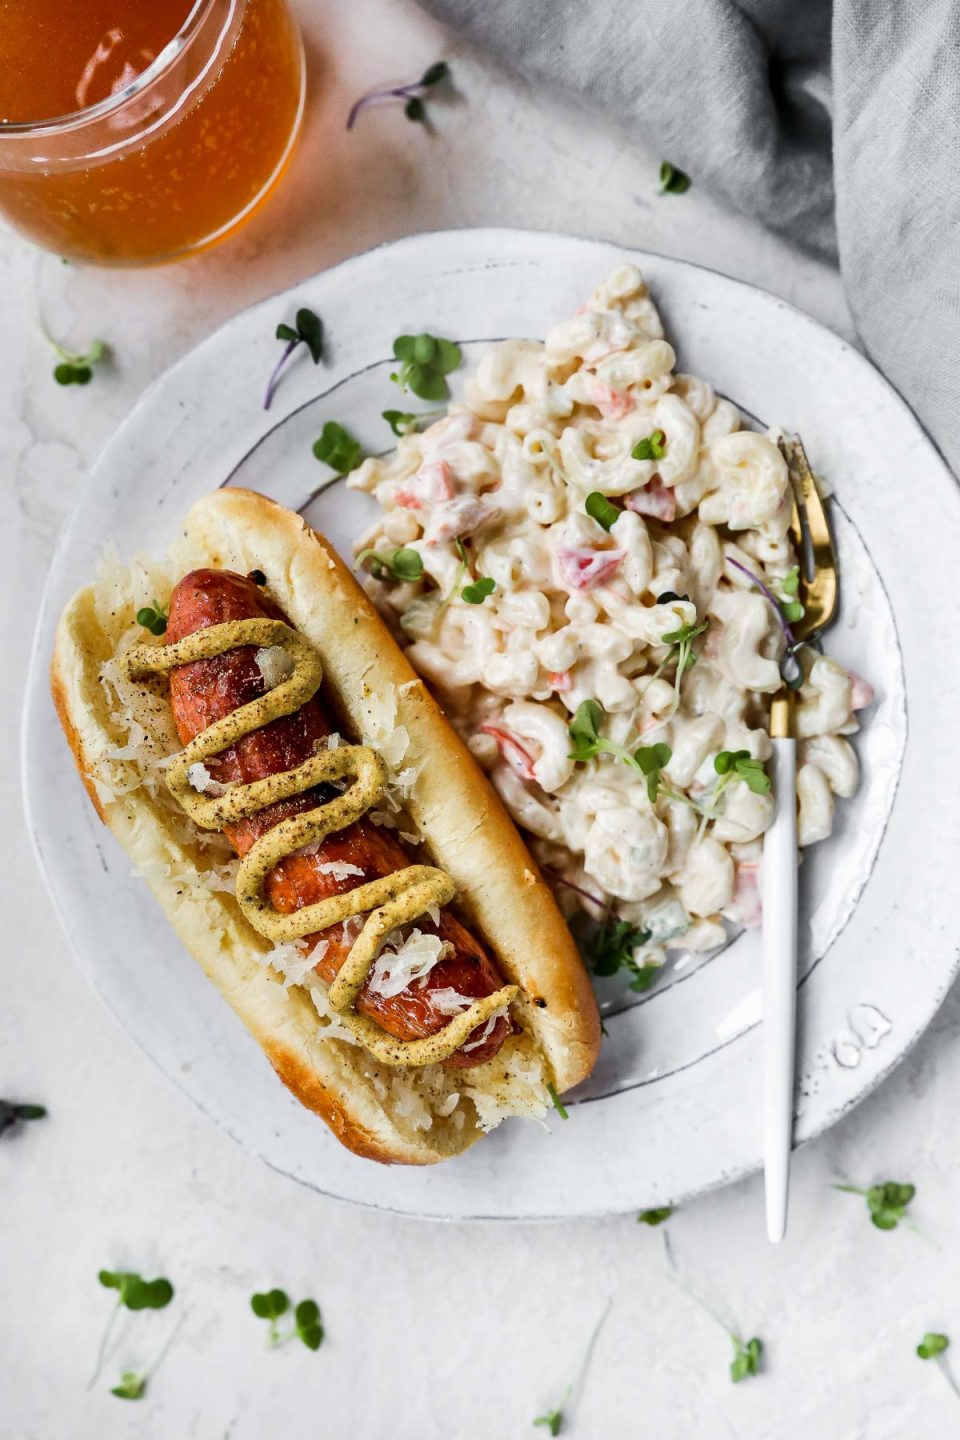 Grilled Sausage on a bun, topped with brown mustard. The sausage is plated with a simple macaroni salad on the side, on a white plate with a gold & white fork. 